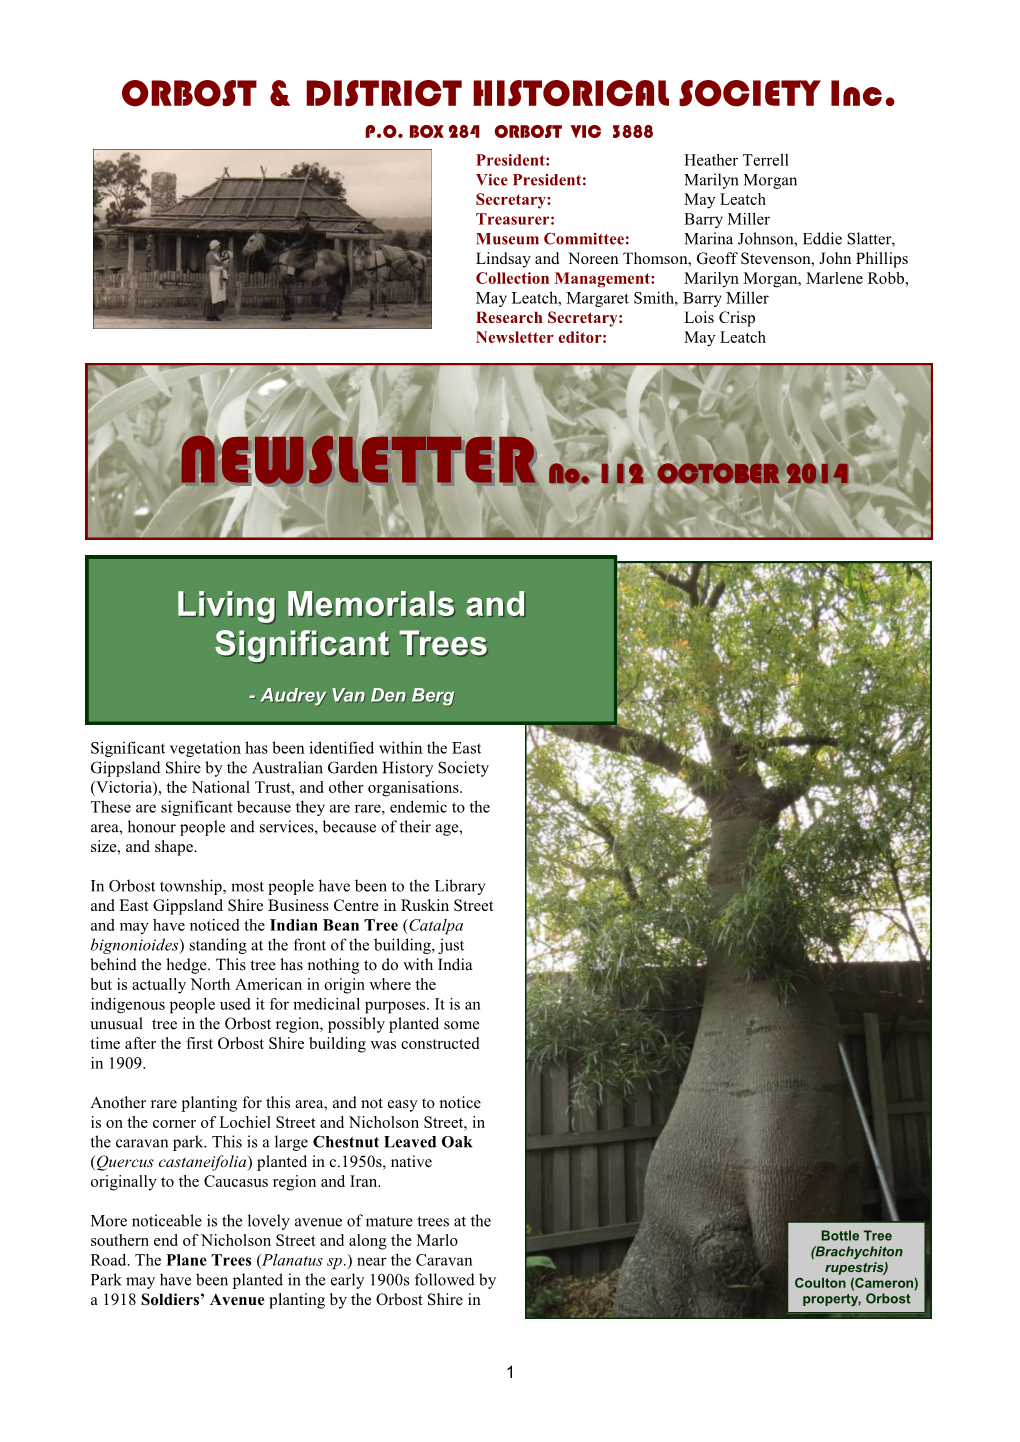 Living Memorials and Significant Trees